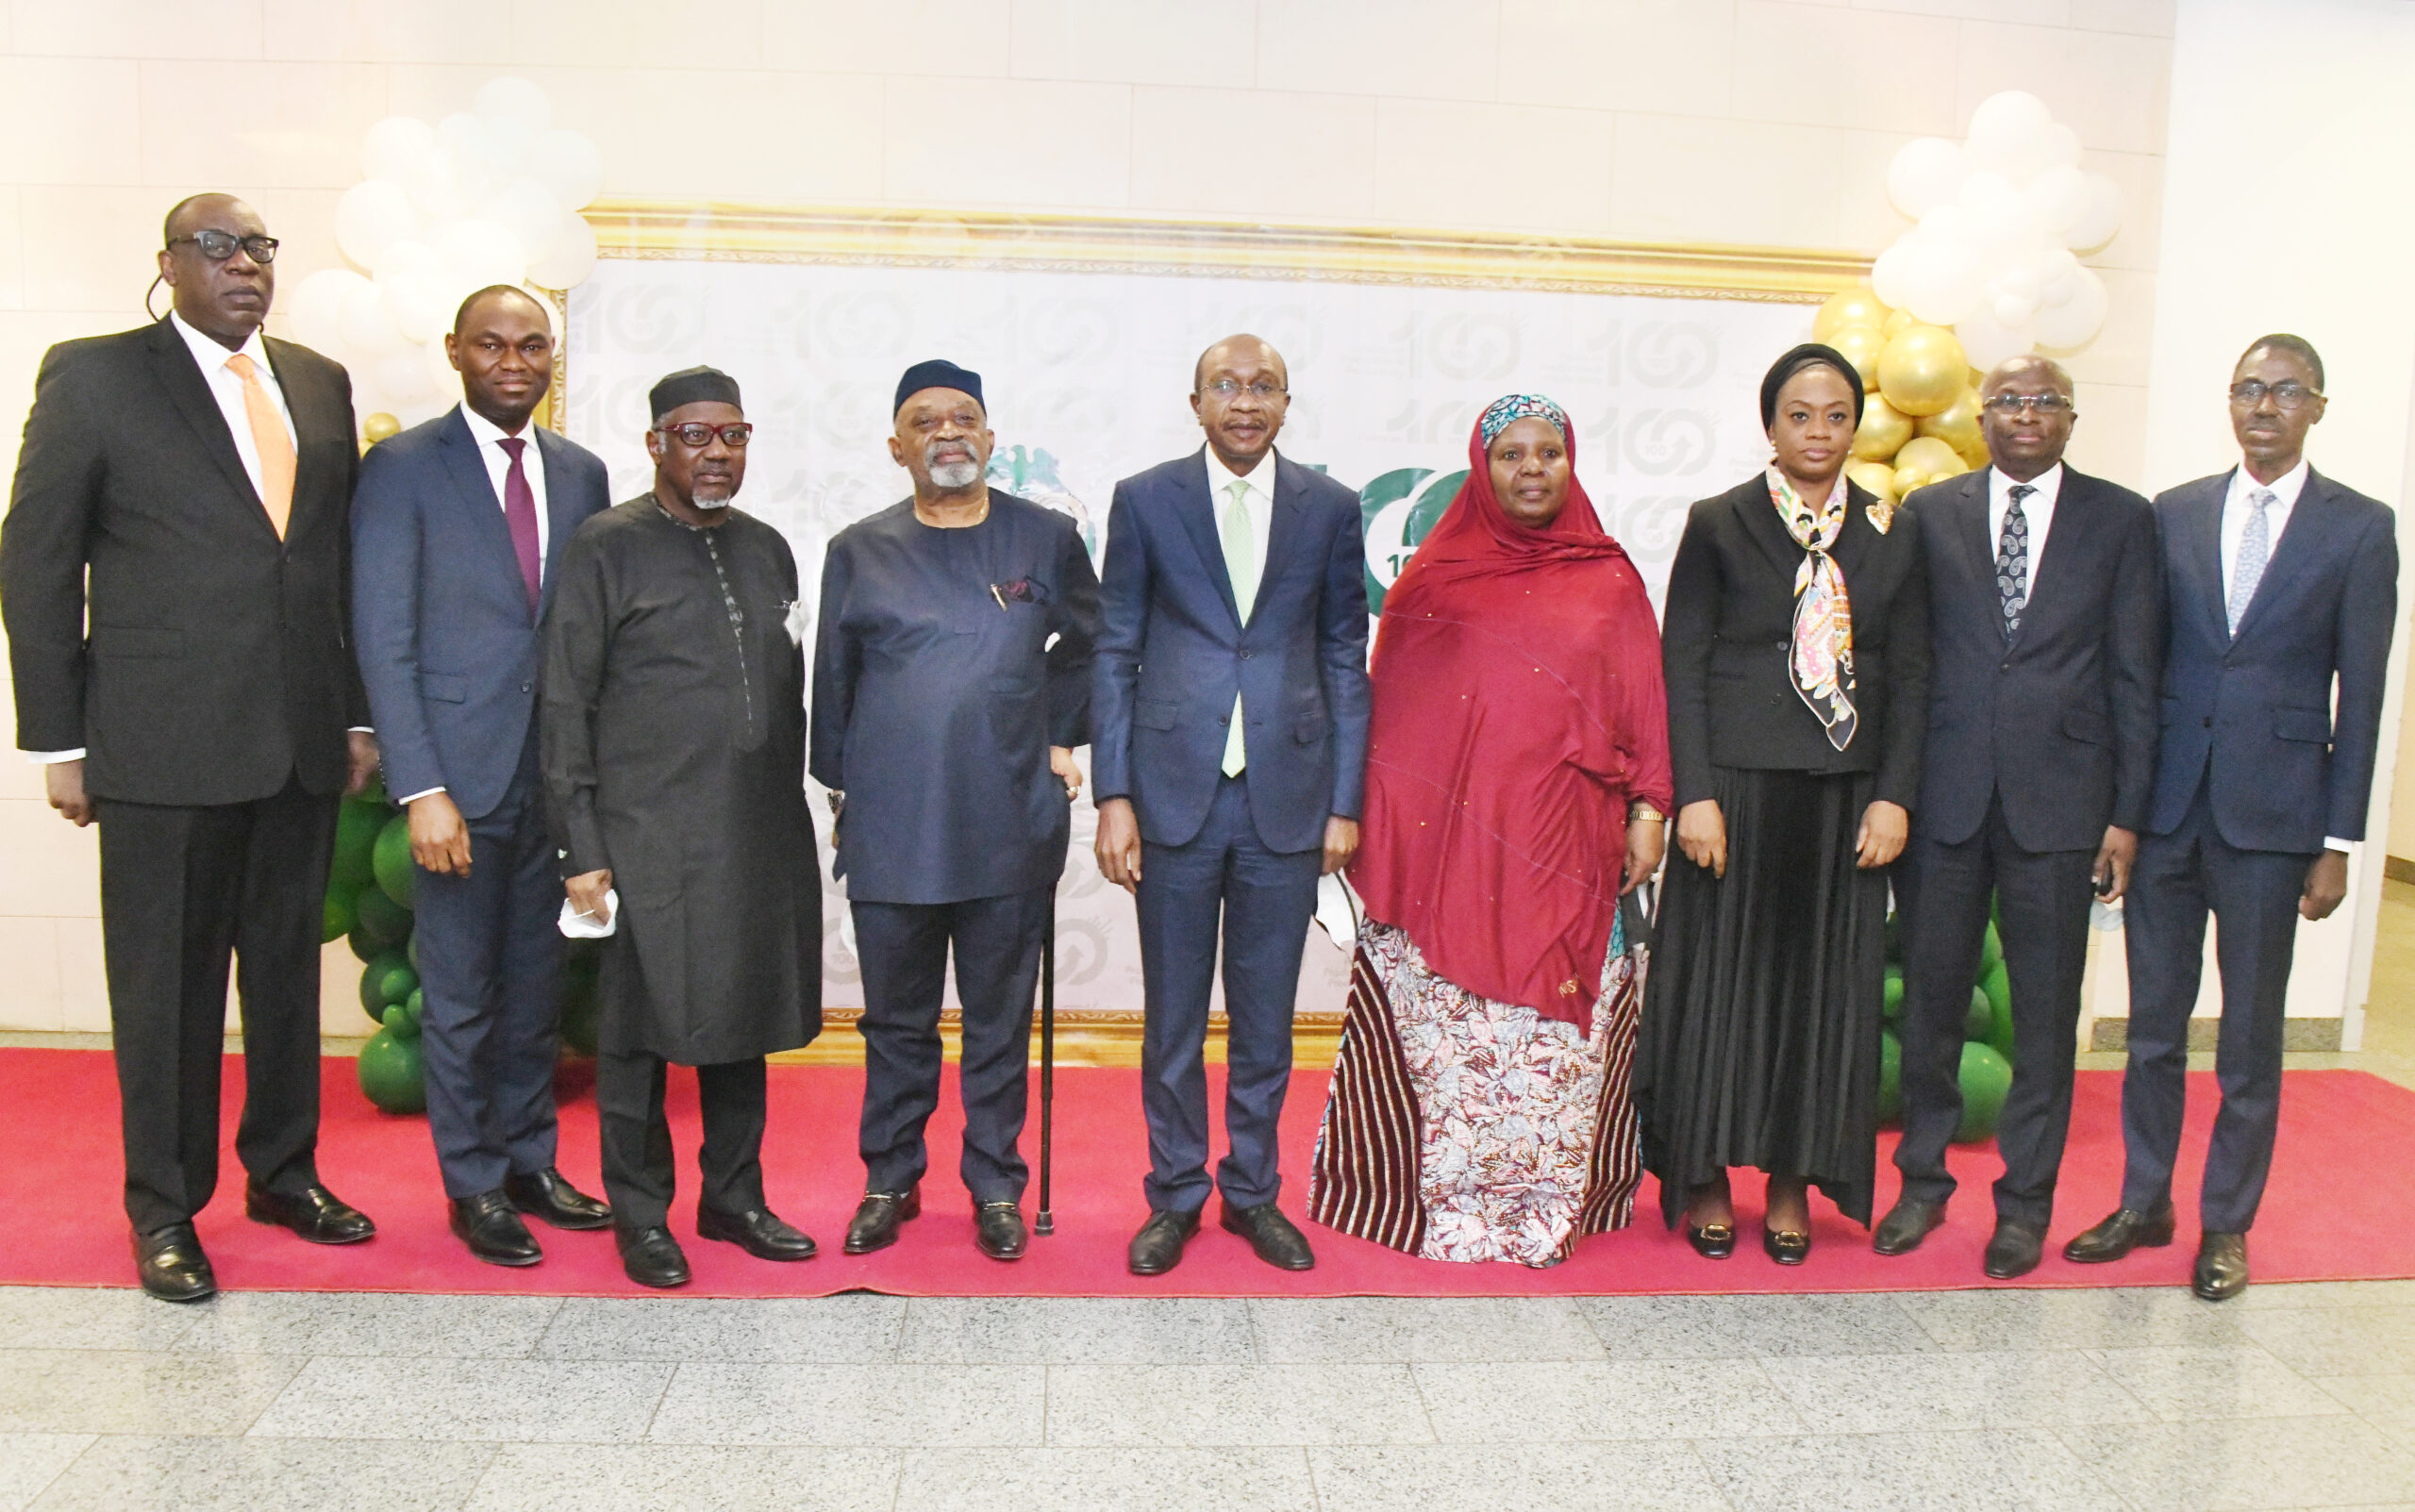 From left: Deputy Governor, Operations, Central Bank of Nigeria (CBN), Adebisi Osinubi; Deputy Governor, Economic Policy, CBN, Dr Kingsley Obiora: President MAN Dr Mansur Ahmed: Minister Labour and Productivity Dr Chris Ngige; Governor, CBN, Godwin Emefiele; Representative of the Secretary to the Federal Government, Dr Habiba Lawal; Deputy Governor, Finacial System Stability, CBN, Mrs Aishah Ahmad; Deputy Governor, Corporate Services, CBN, Edward Adamu and MD Nigeria Deposit Insurance Corporation (NDIC), Bello Hassan at the formal launch of the 100 for 100 Productive and Production Policy of the CBN in Abuja on Monday